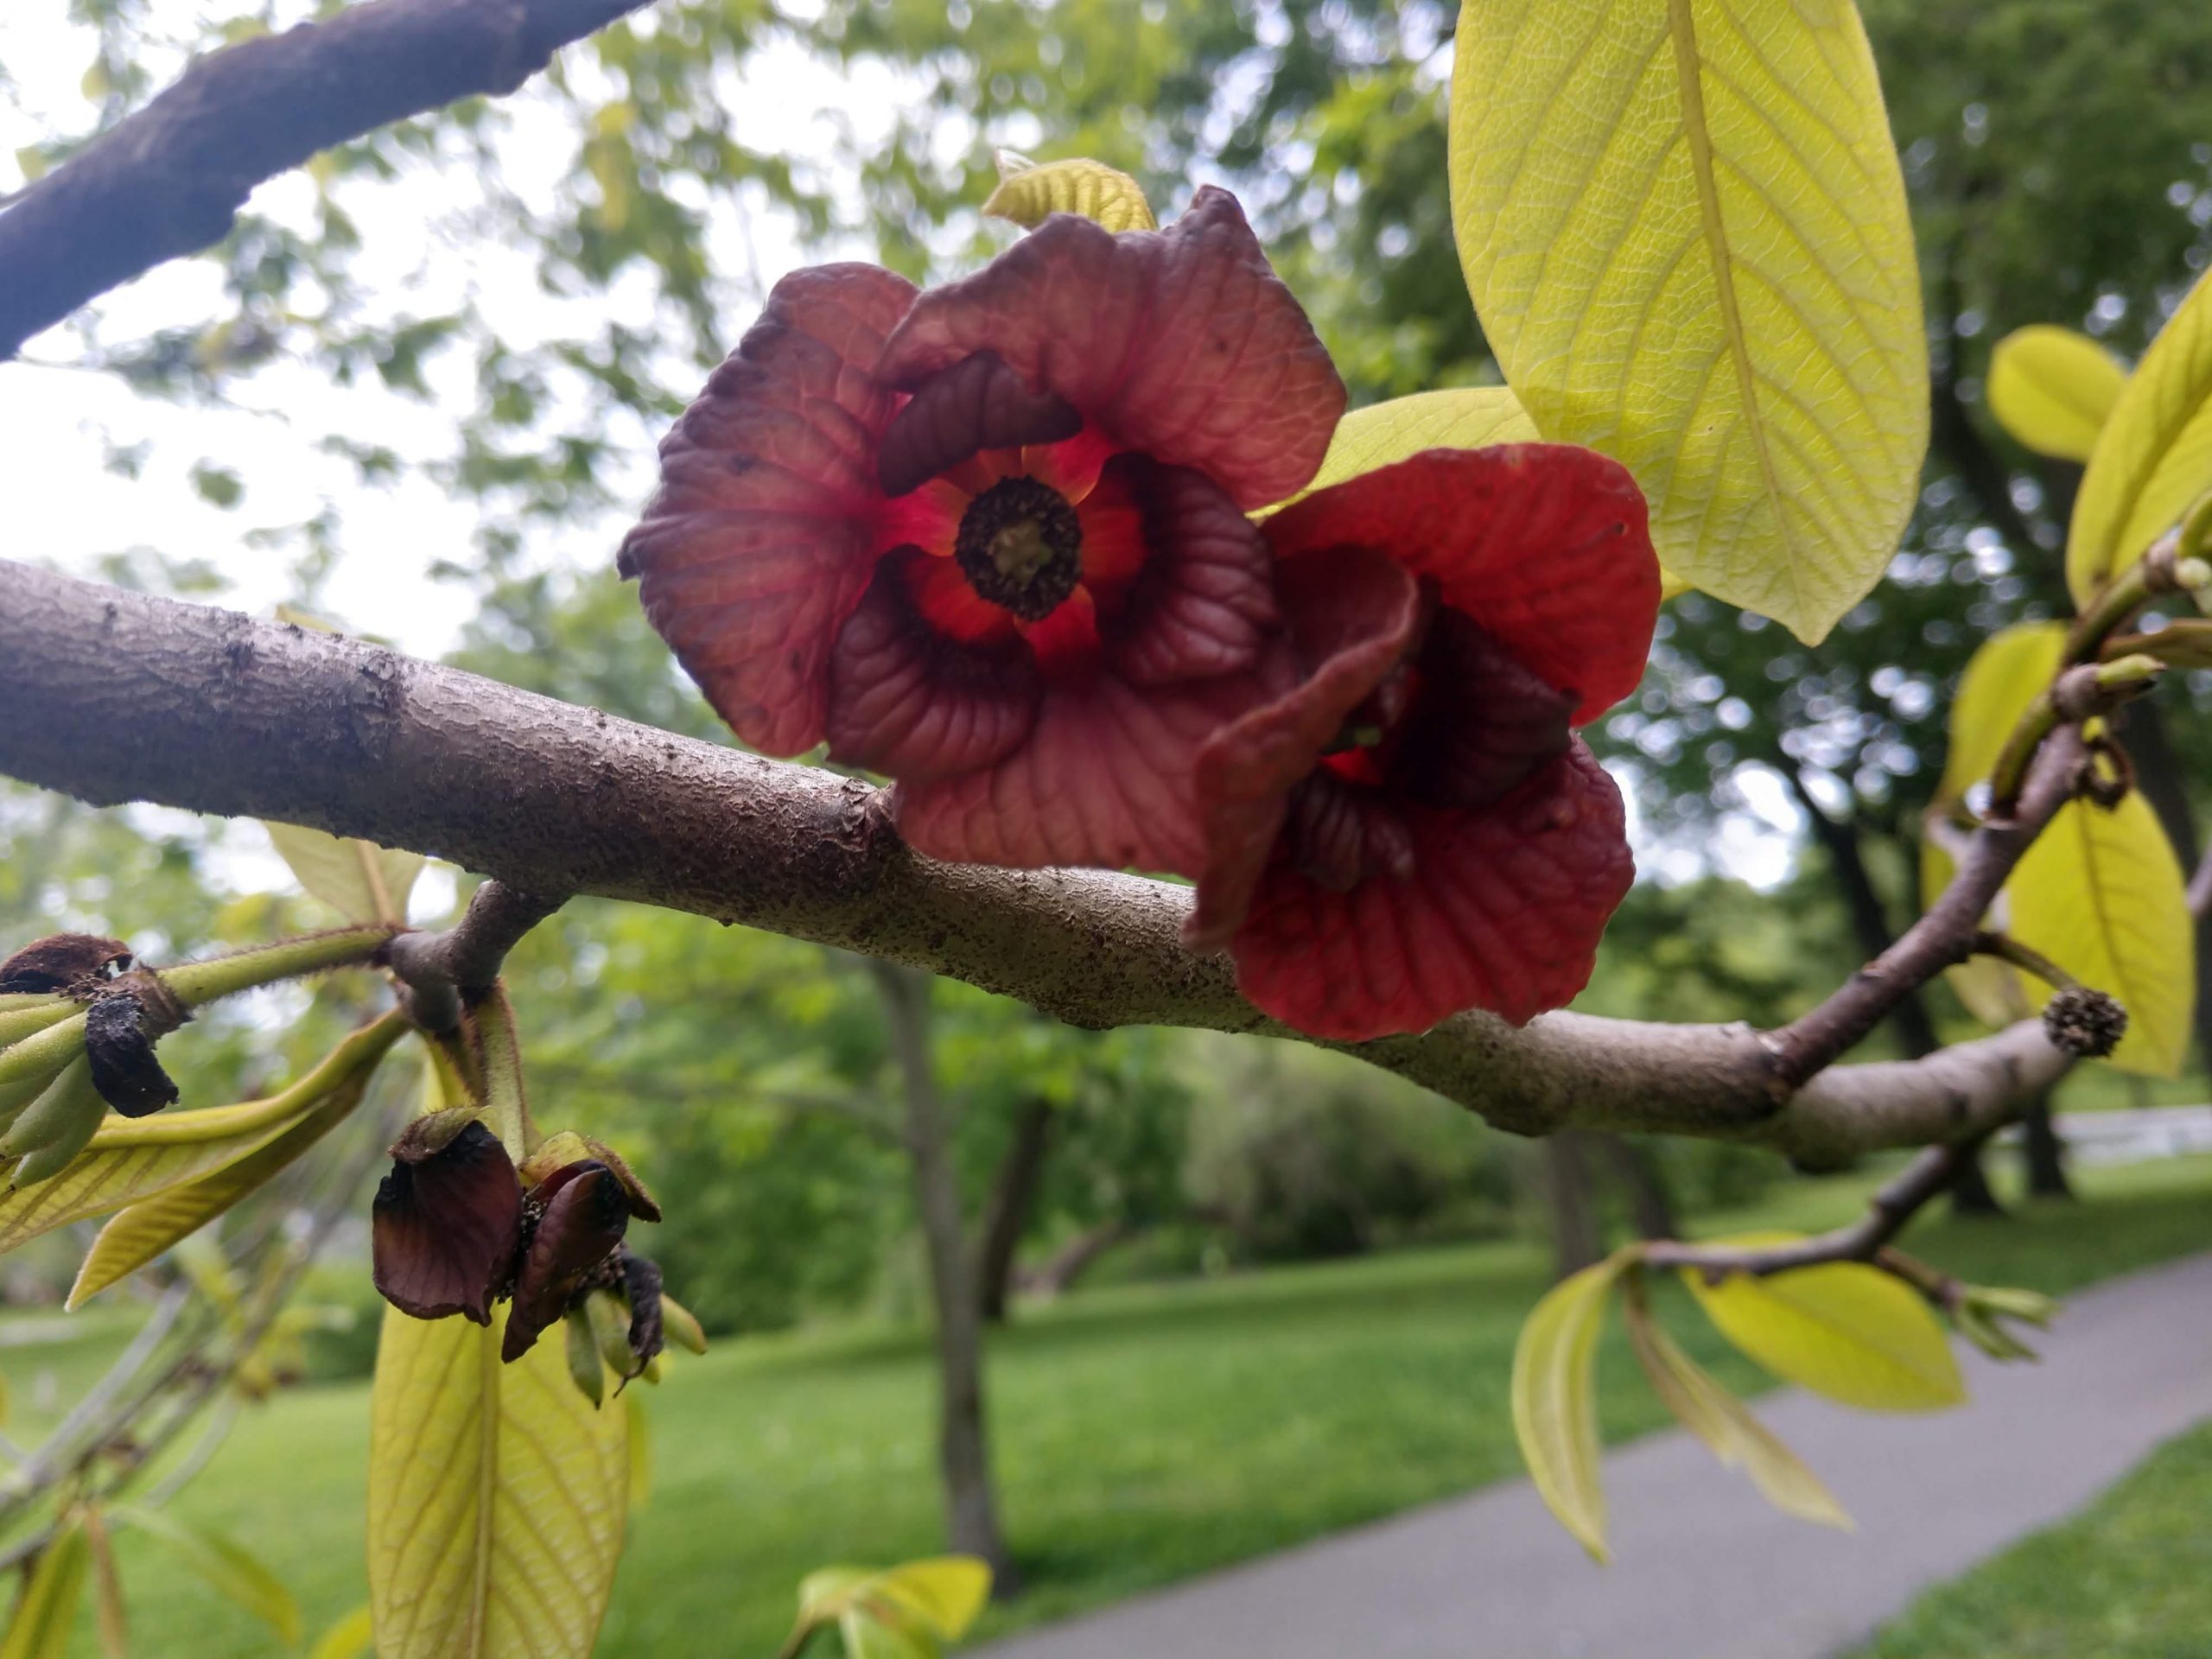 Dark red flowers on a branch surrounded by greenery.